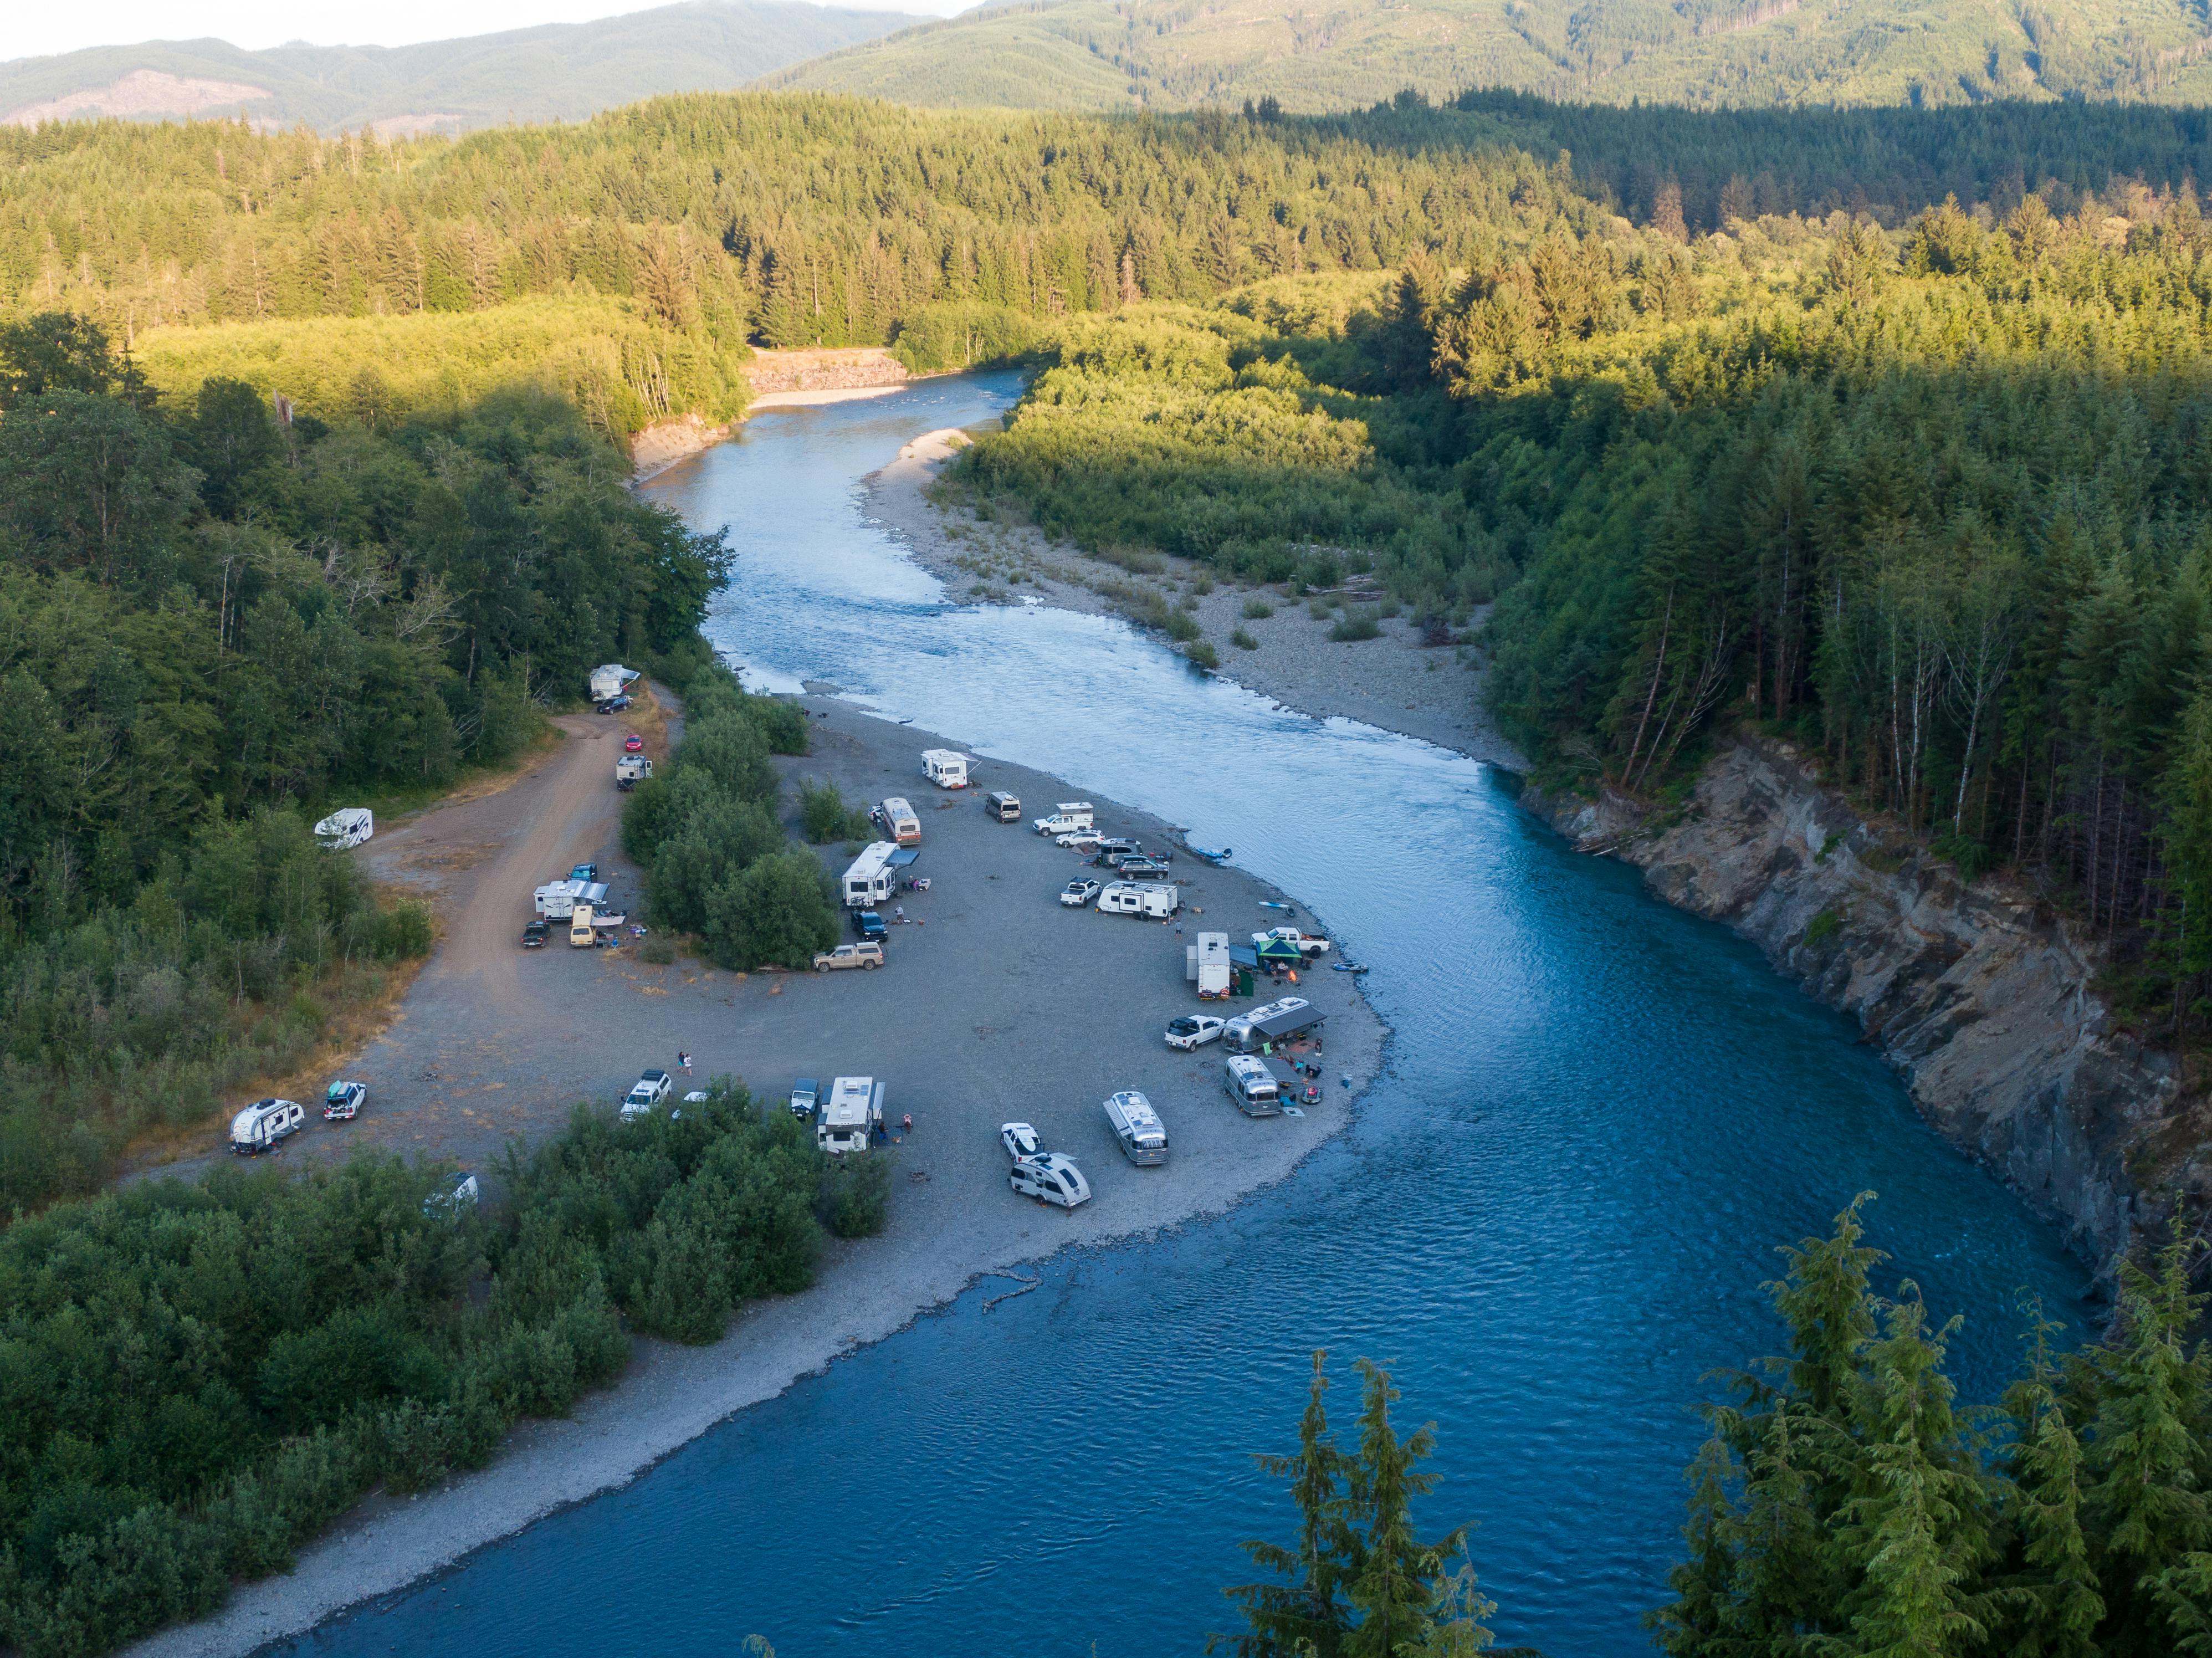 Karen Blue's Airstream parked by a river with other RVs